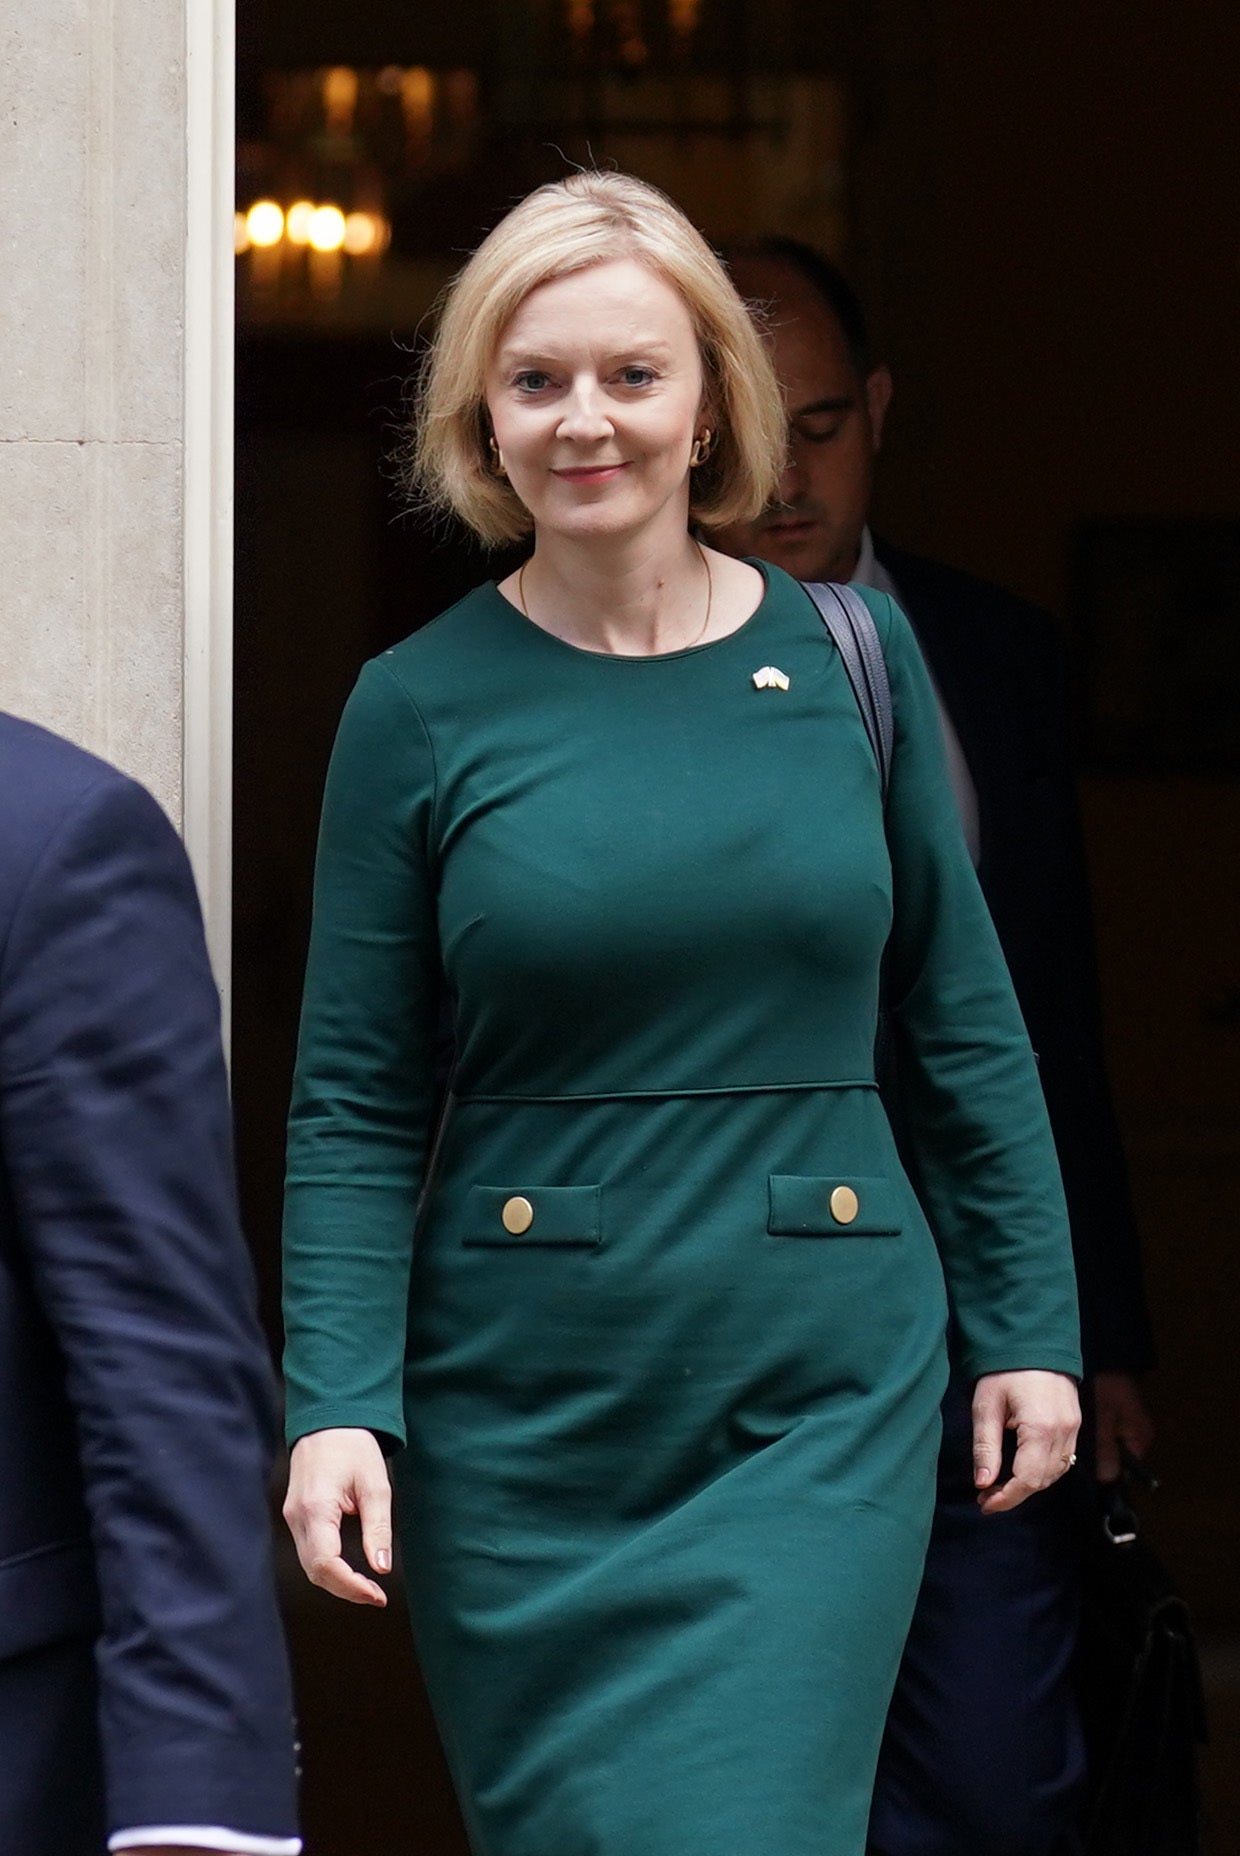 Prime Minister Liz Truss leaves 10 Downing Street for the House of Commons (Kirsty O’Connor/PA)